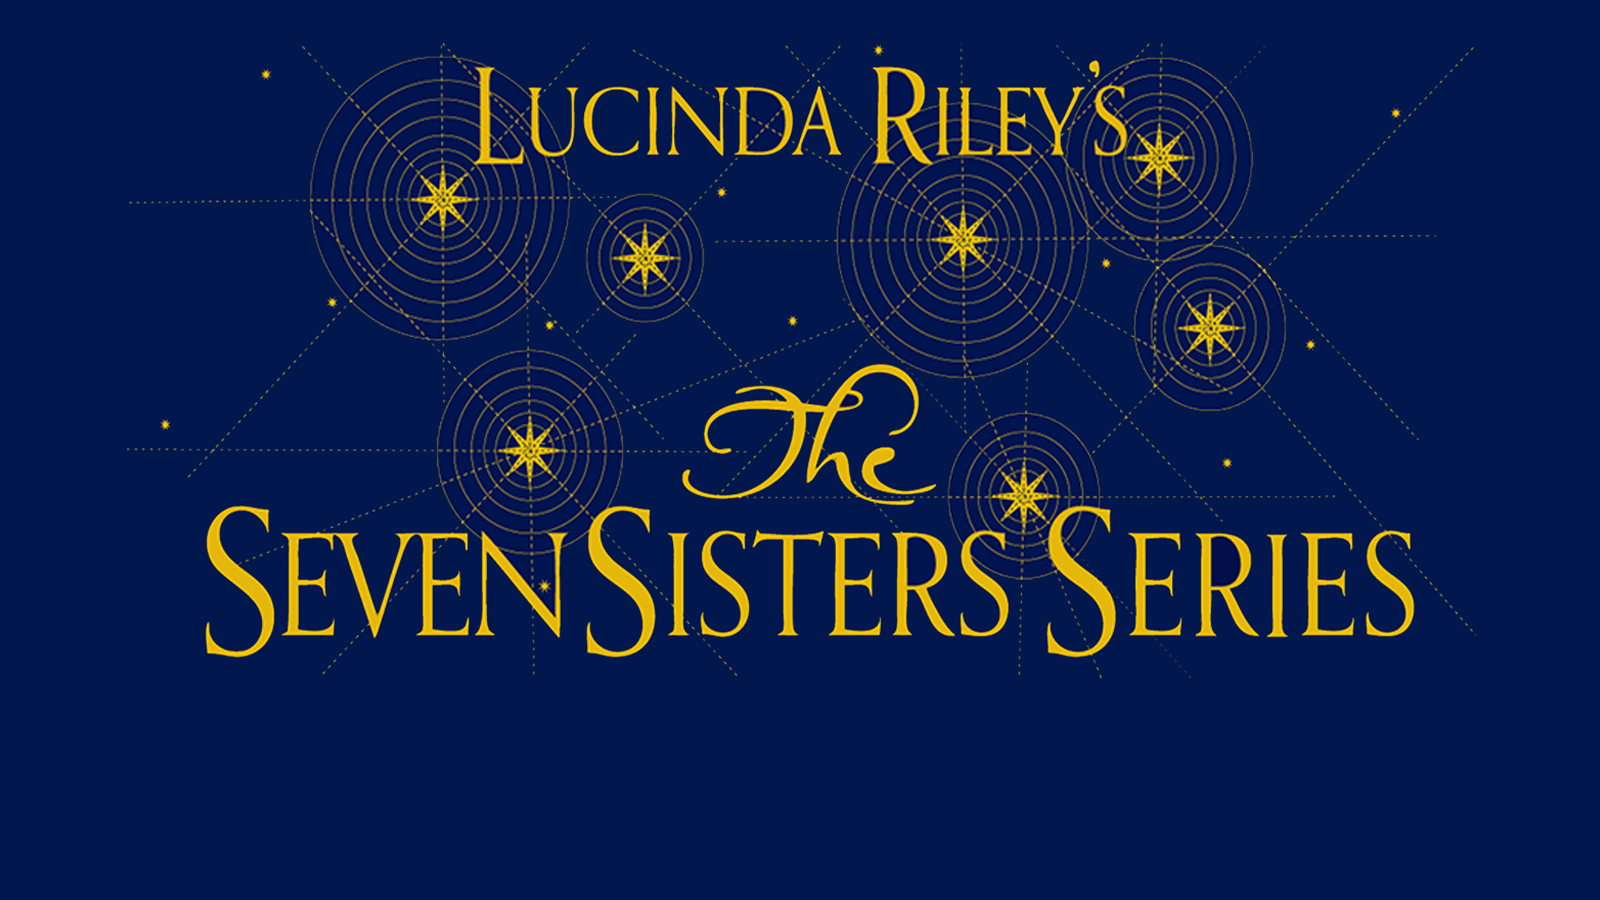 Lucinda Riley's The Seven Sisters series